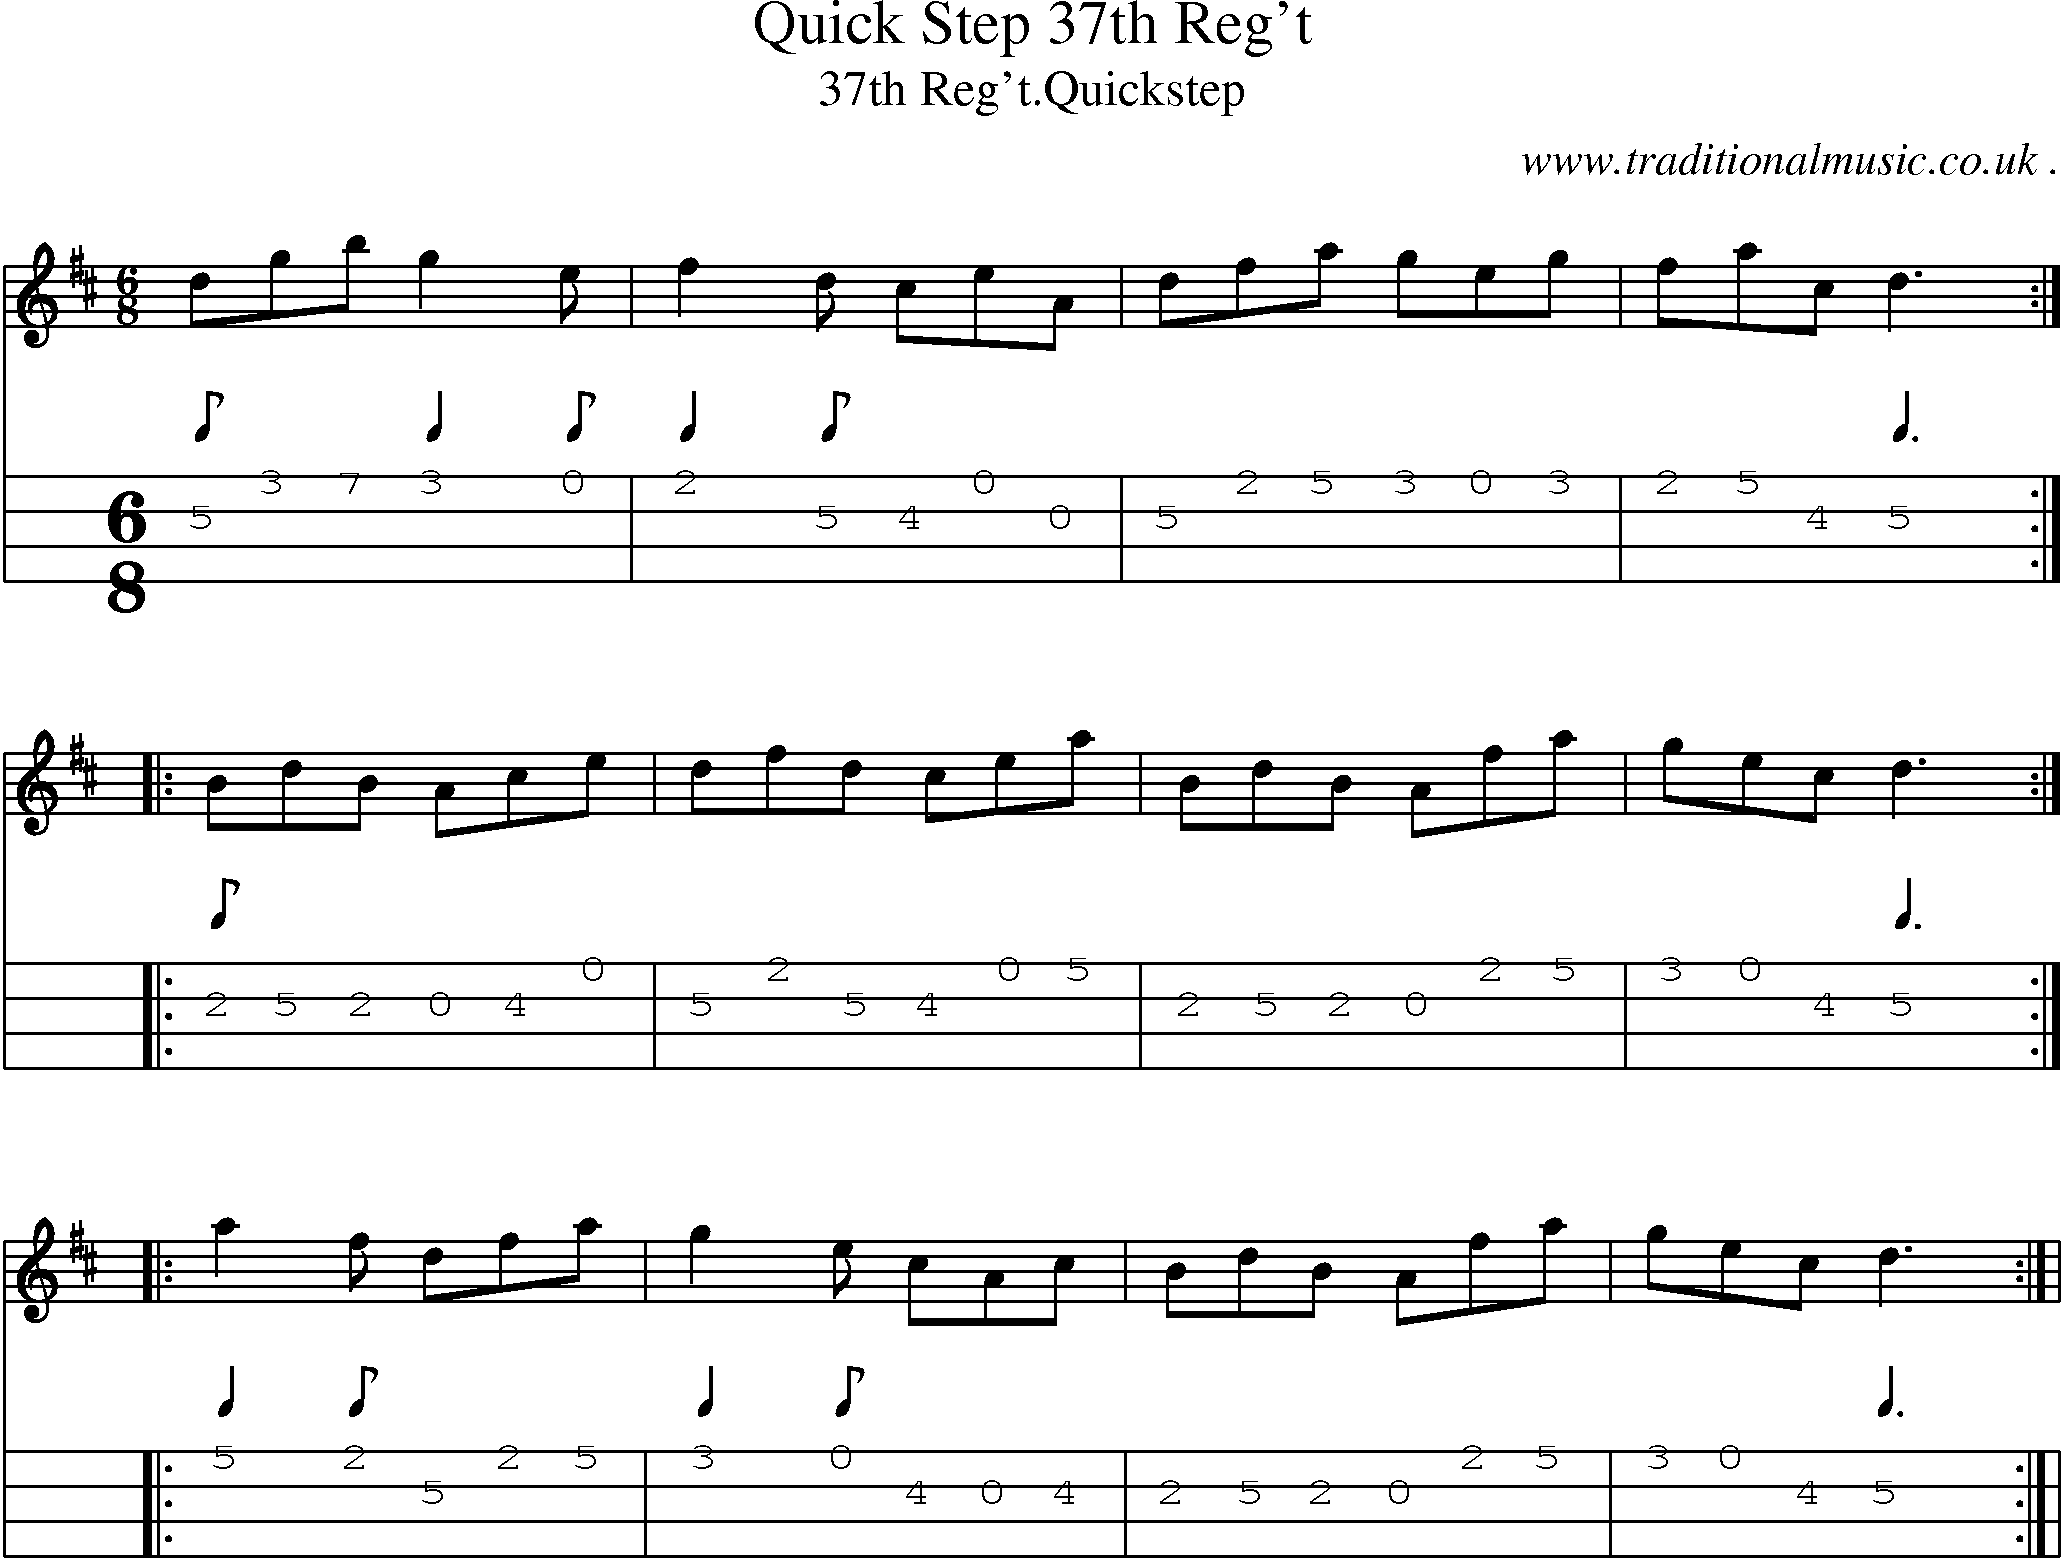 Sheet-Music and Mandolin Tabs for Quick Step 37th Reg